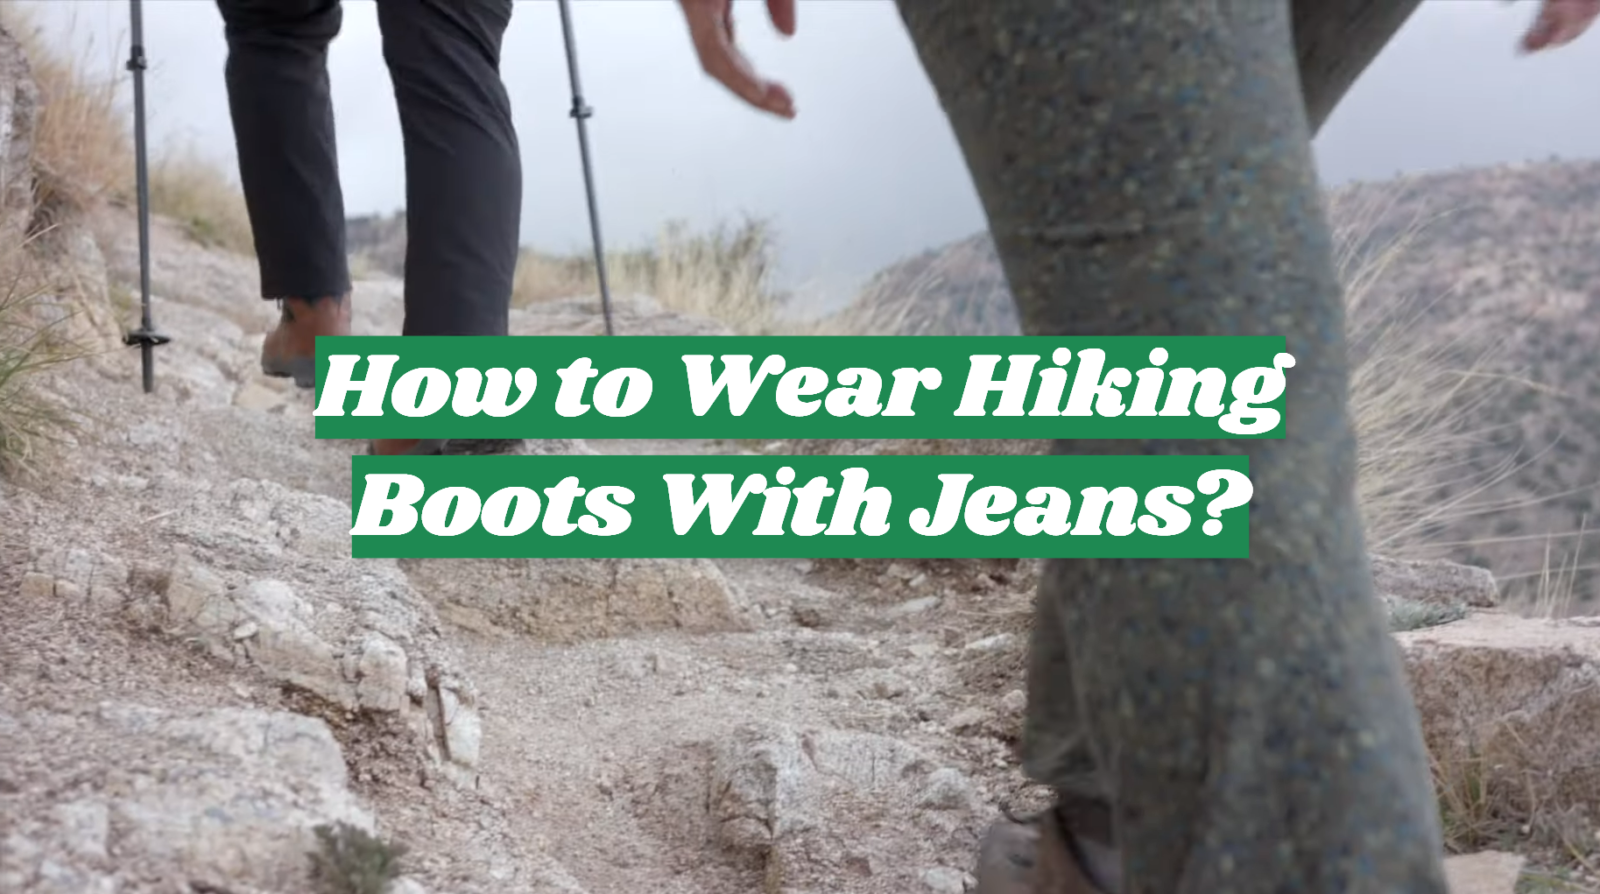 How to Wear Hiking Boots With Jeans?